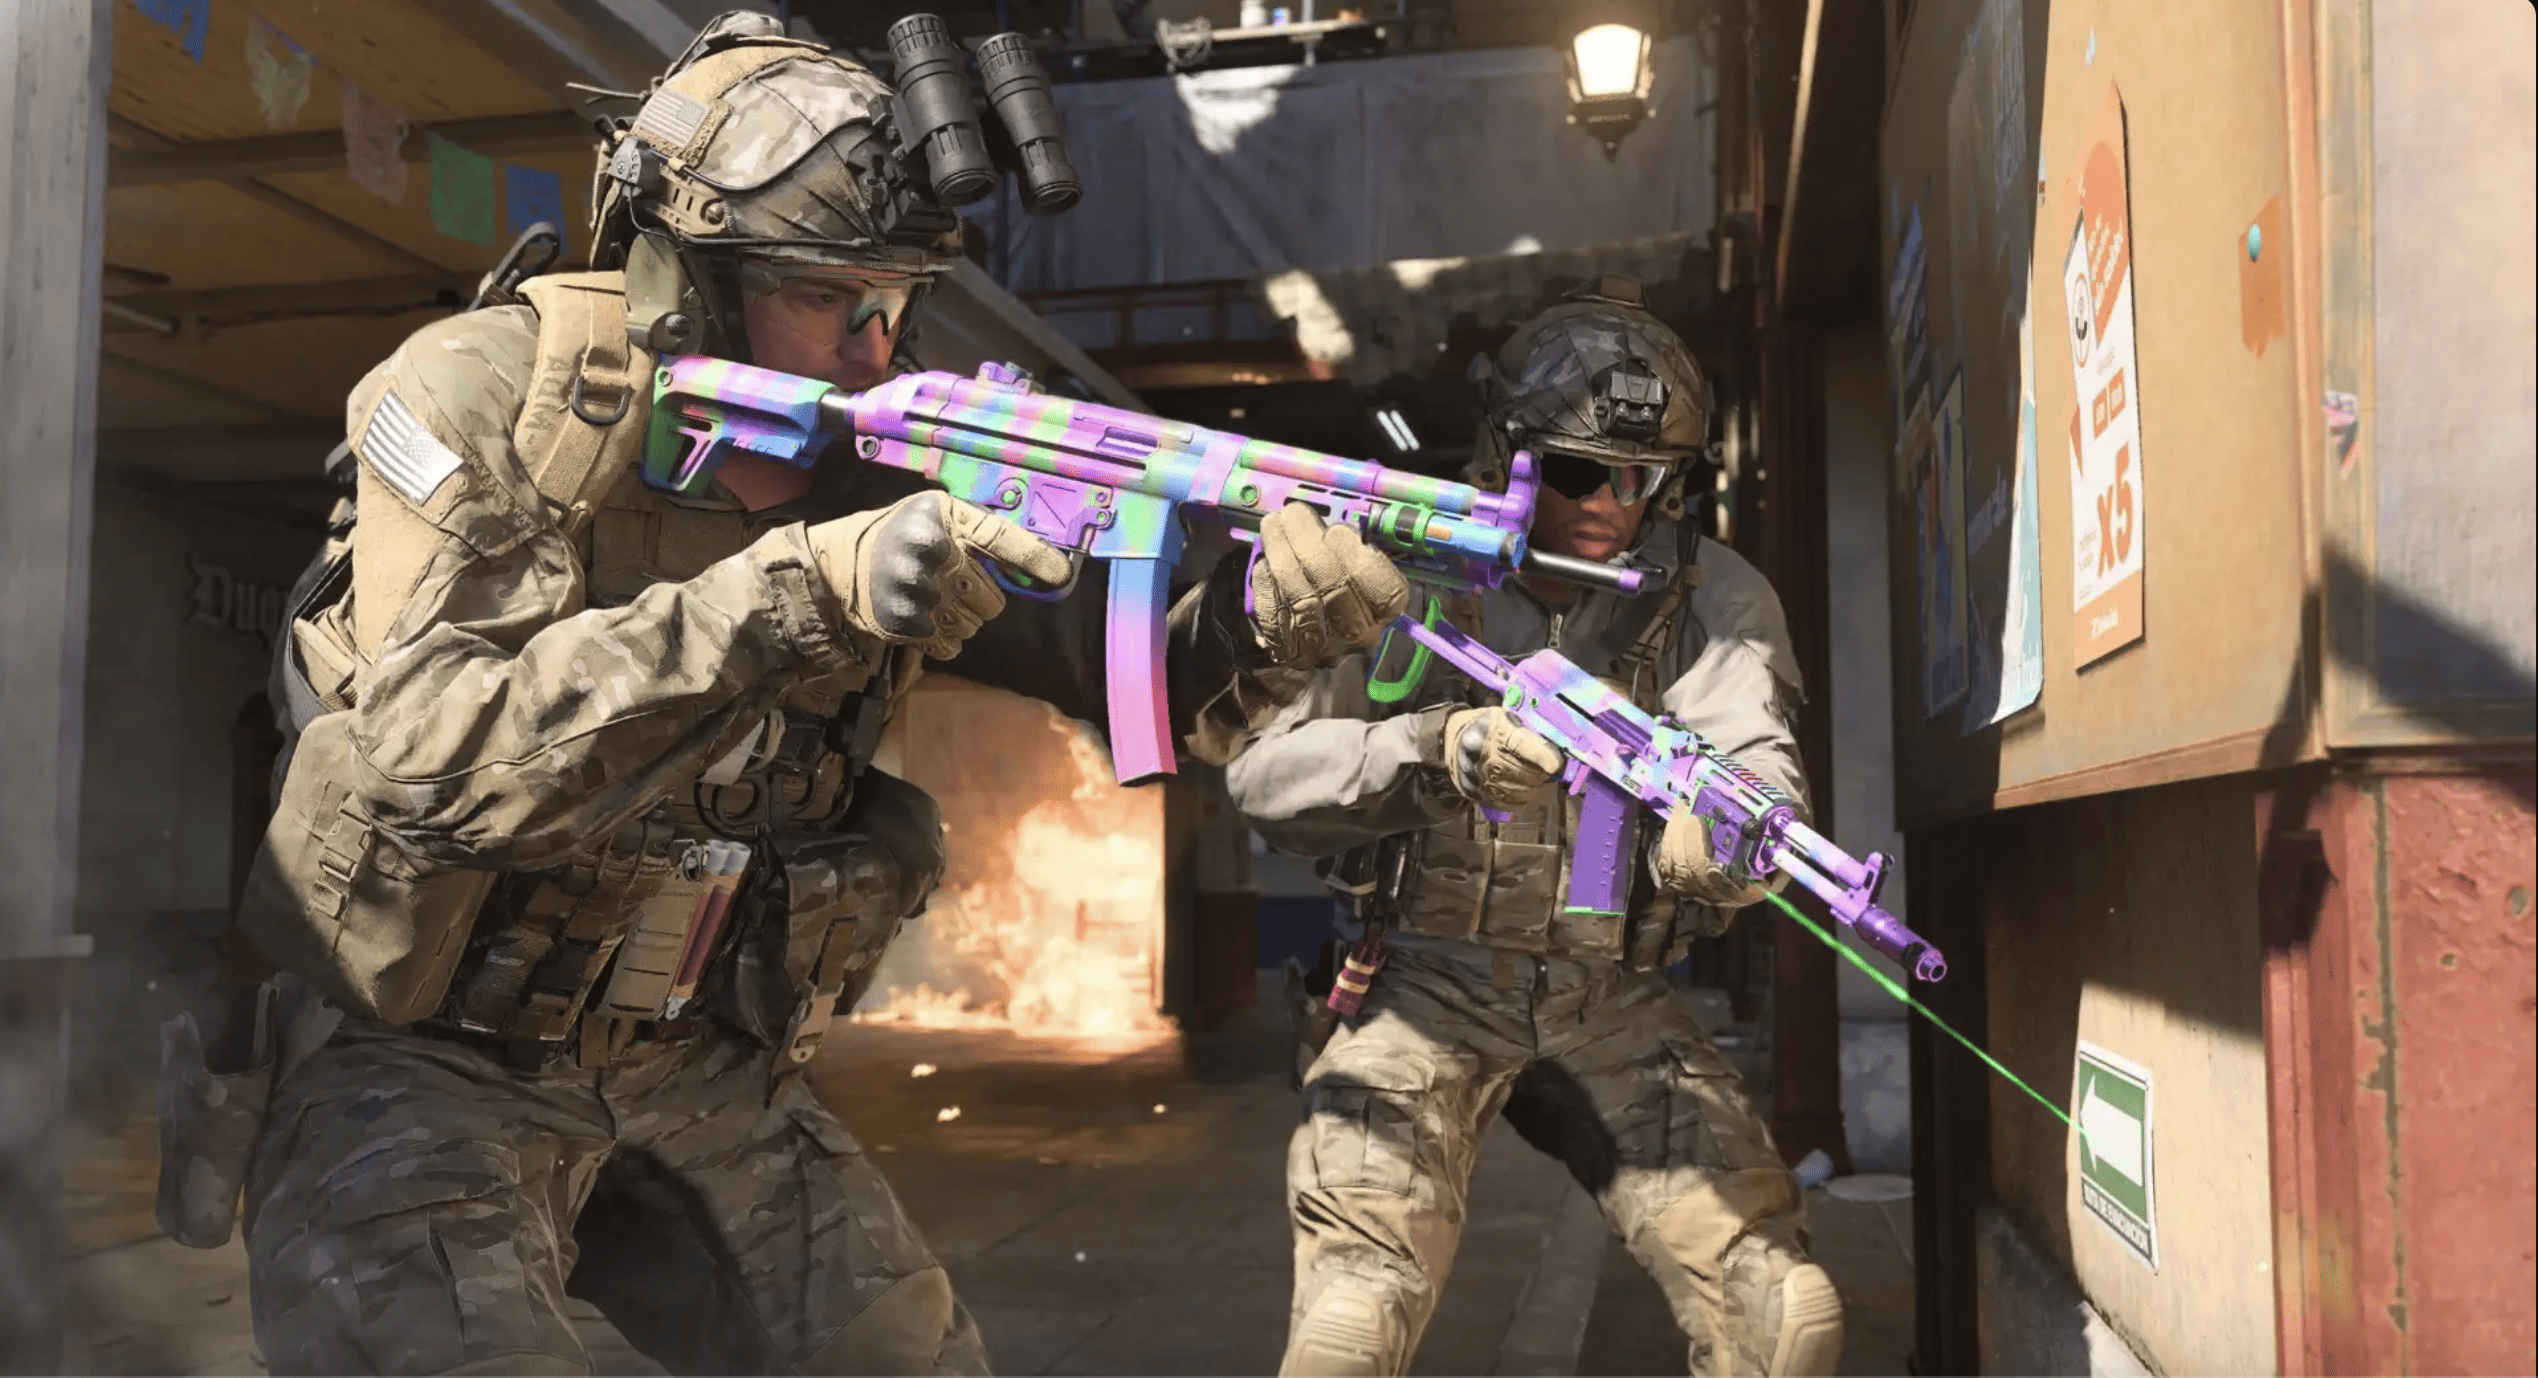 MW2 is giving out two Weapon Blueprints and a Punk Unicorn charm with this Prime Gaming bundle